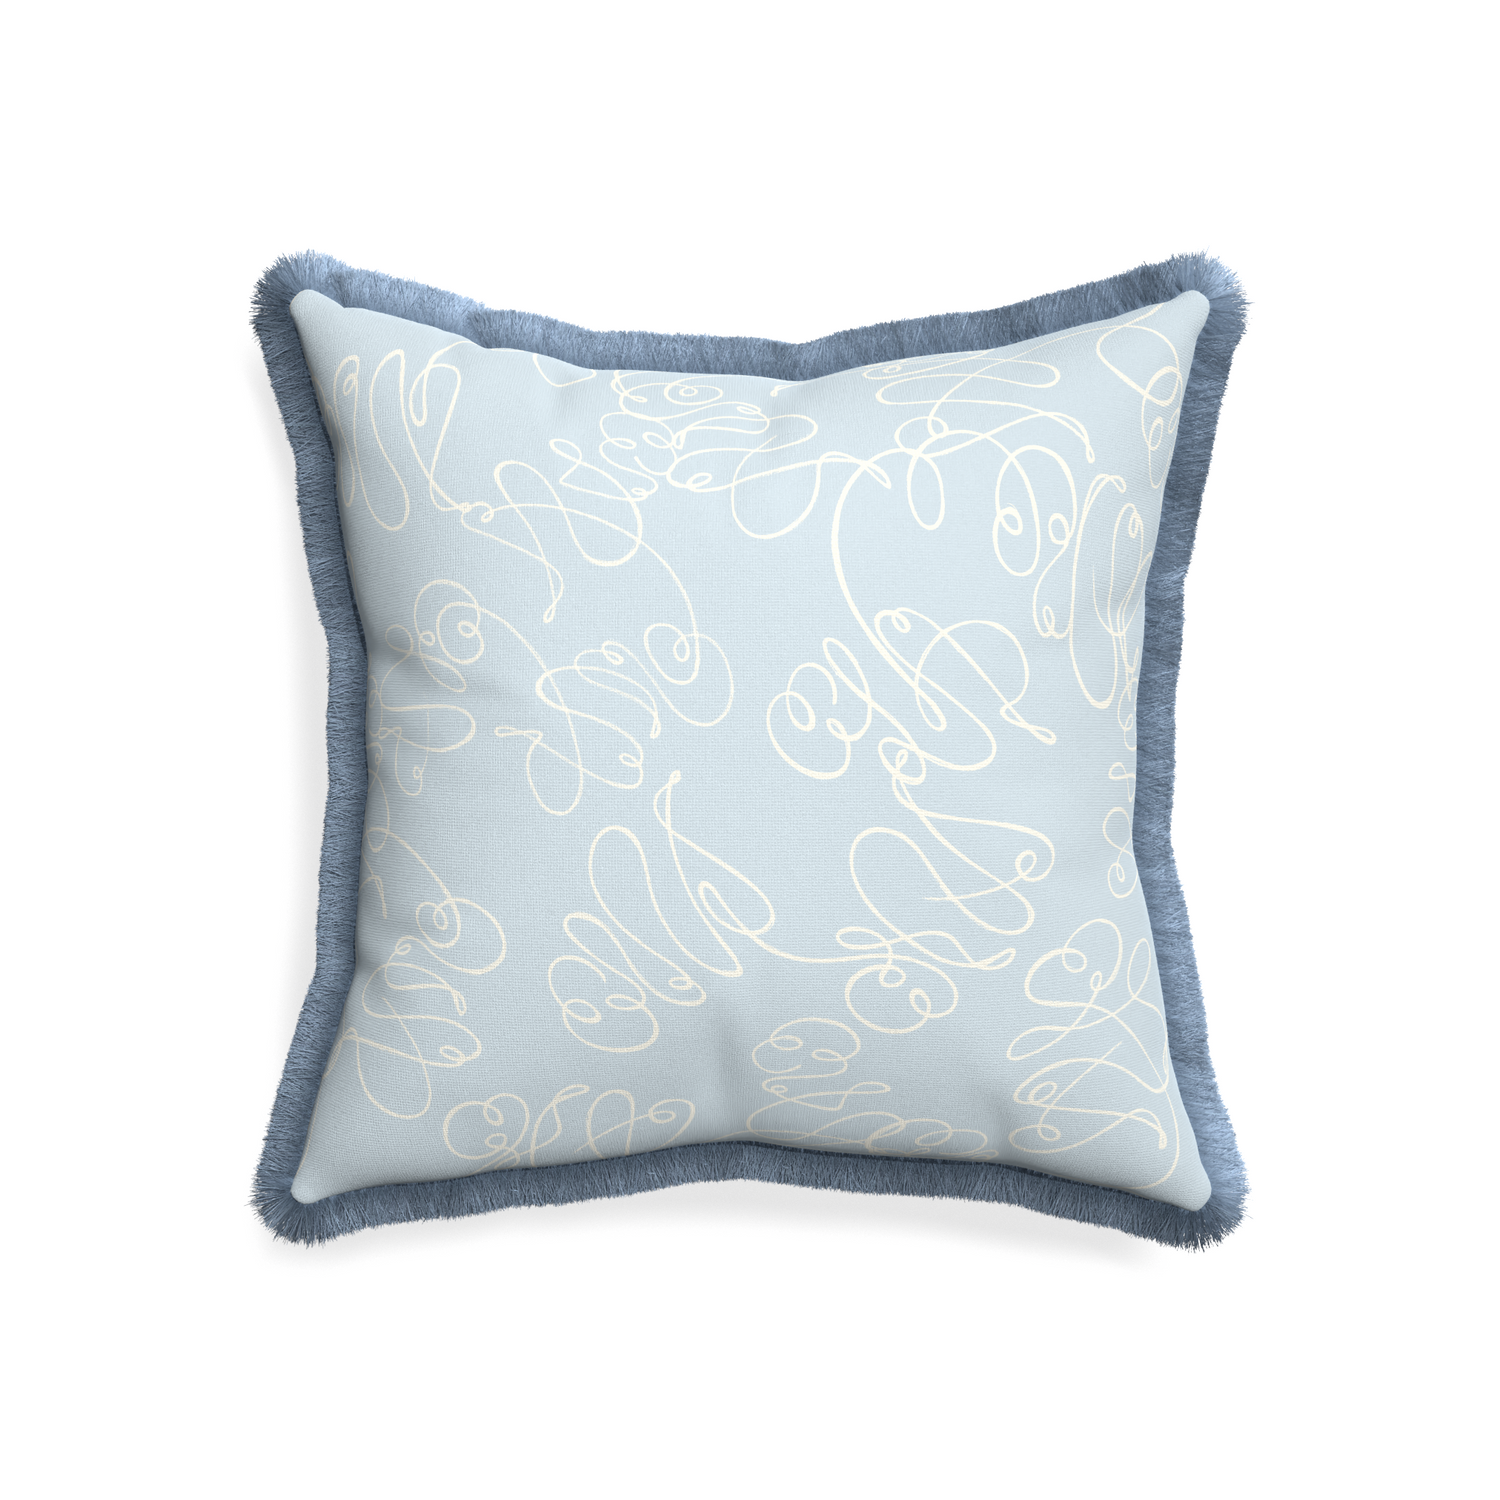 20-square mirabella custom pillow with sky fringe on white background